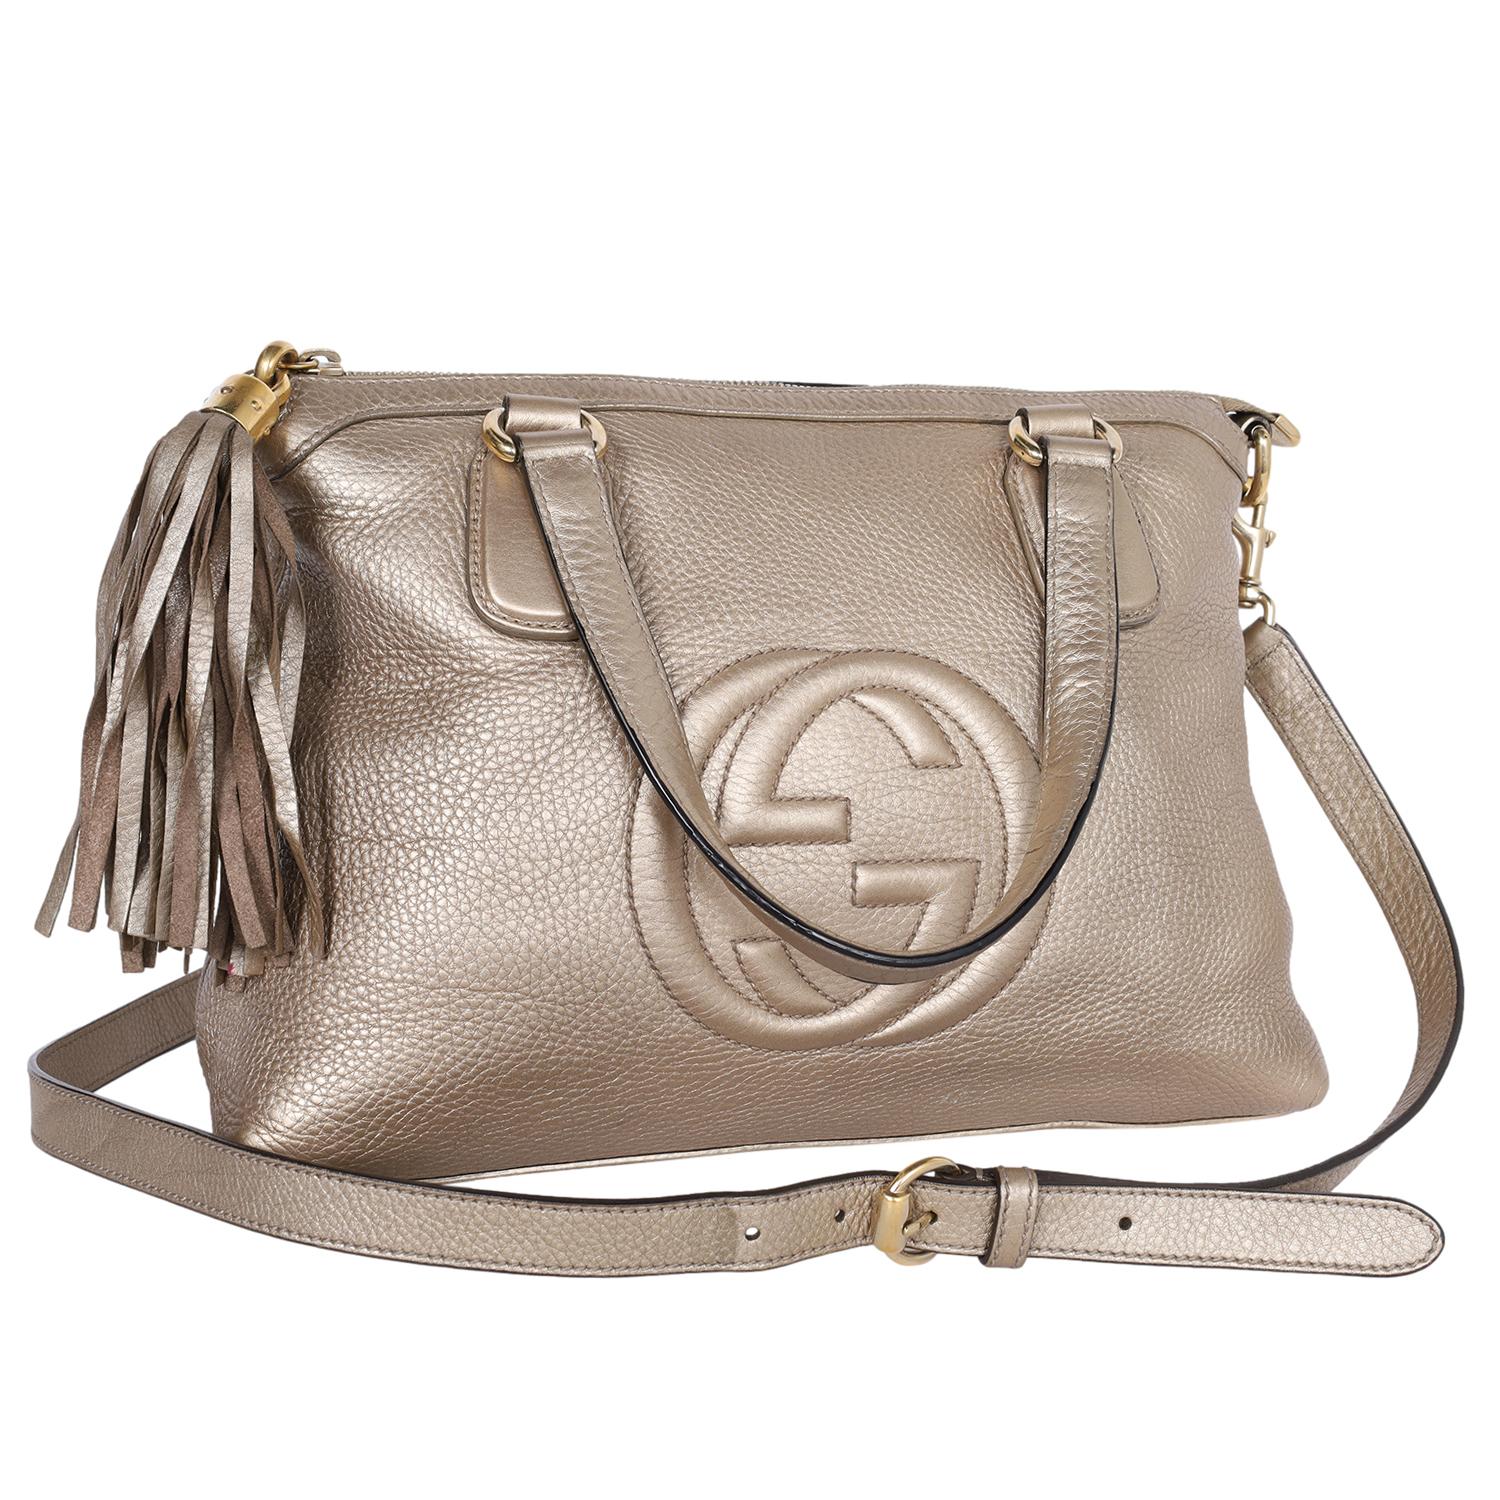 Gucci Soho Metallic Gold Pebbled Calfskin Leather Top Handle Bag In Good Condition For Sale In Salt Lake Cty, UT